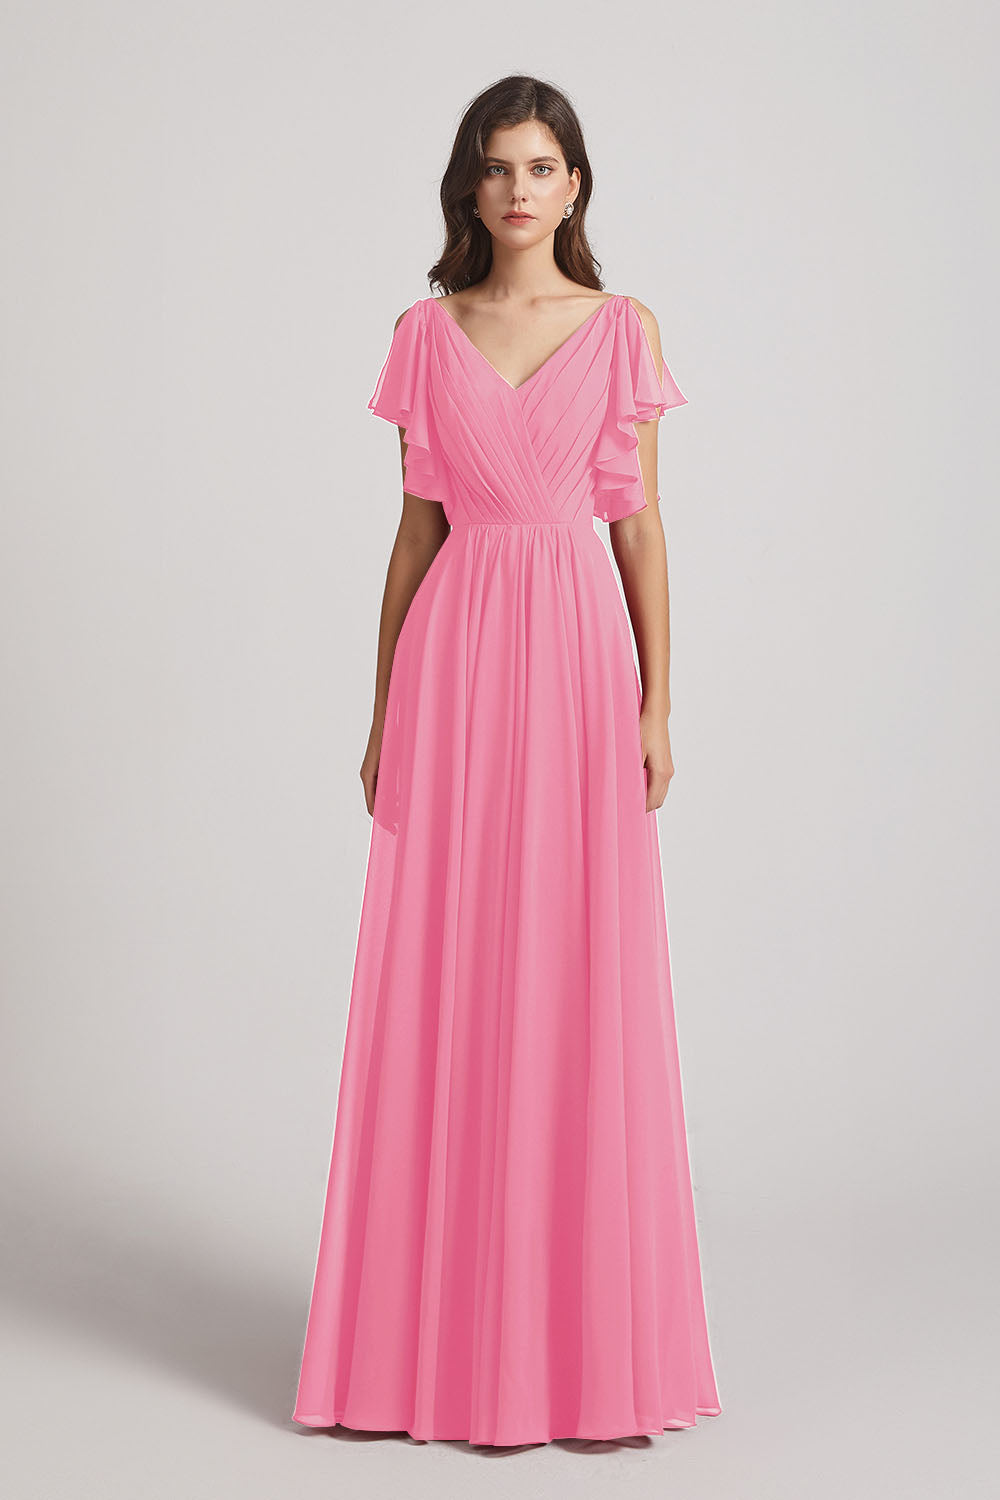 Alfa Bridal Hot Pink V-Neck Pleated Chiffon Bridesmaid Dresses with Open Flutter Sleeves (AF0098)